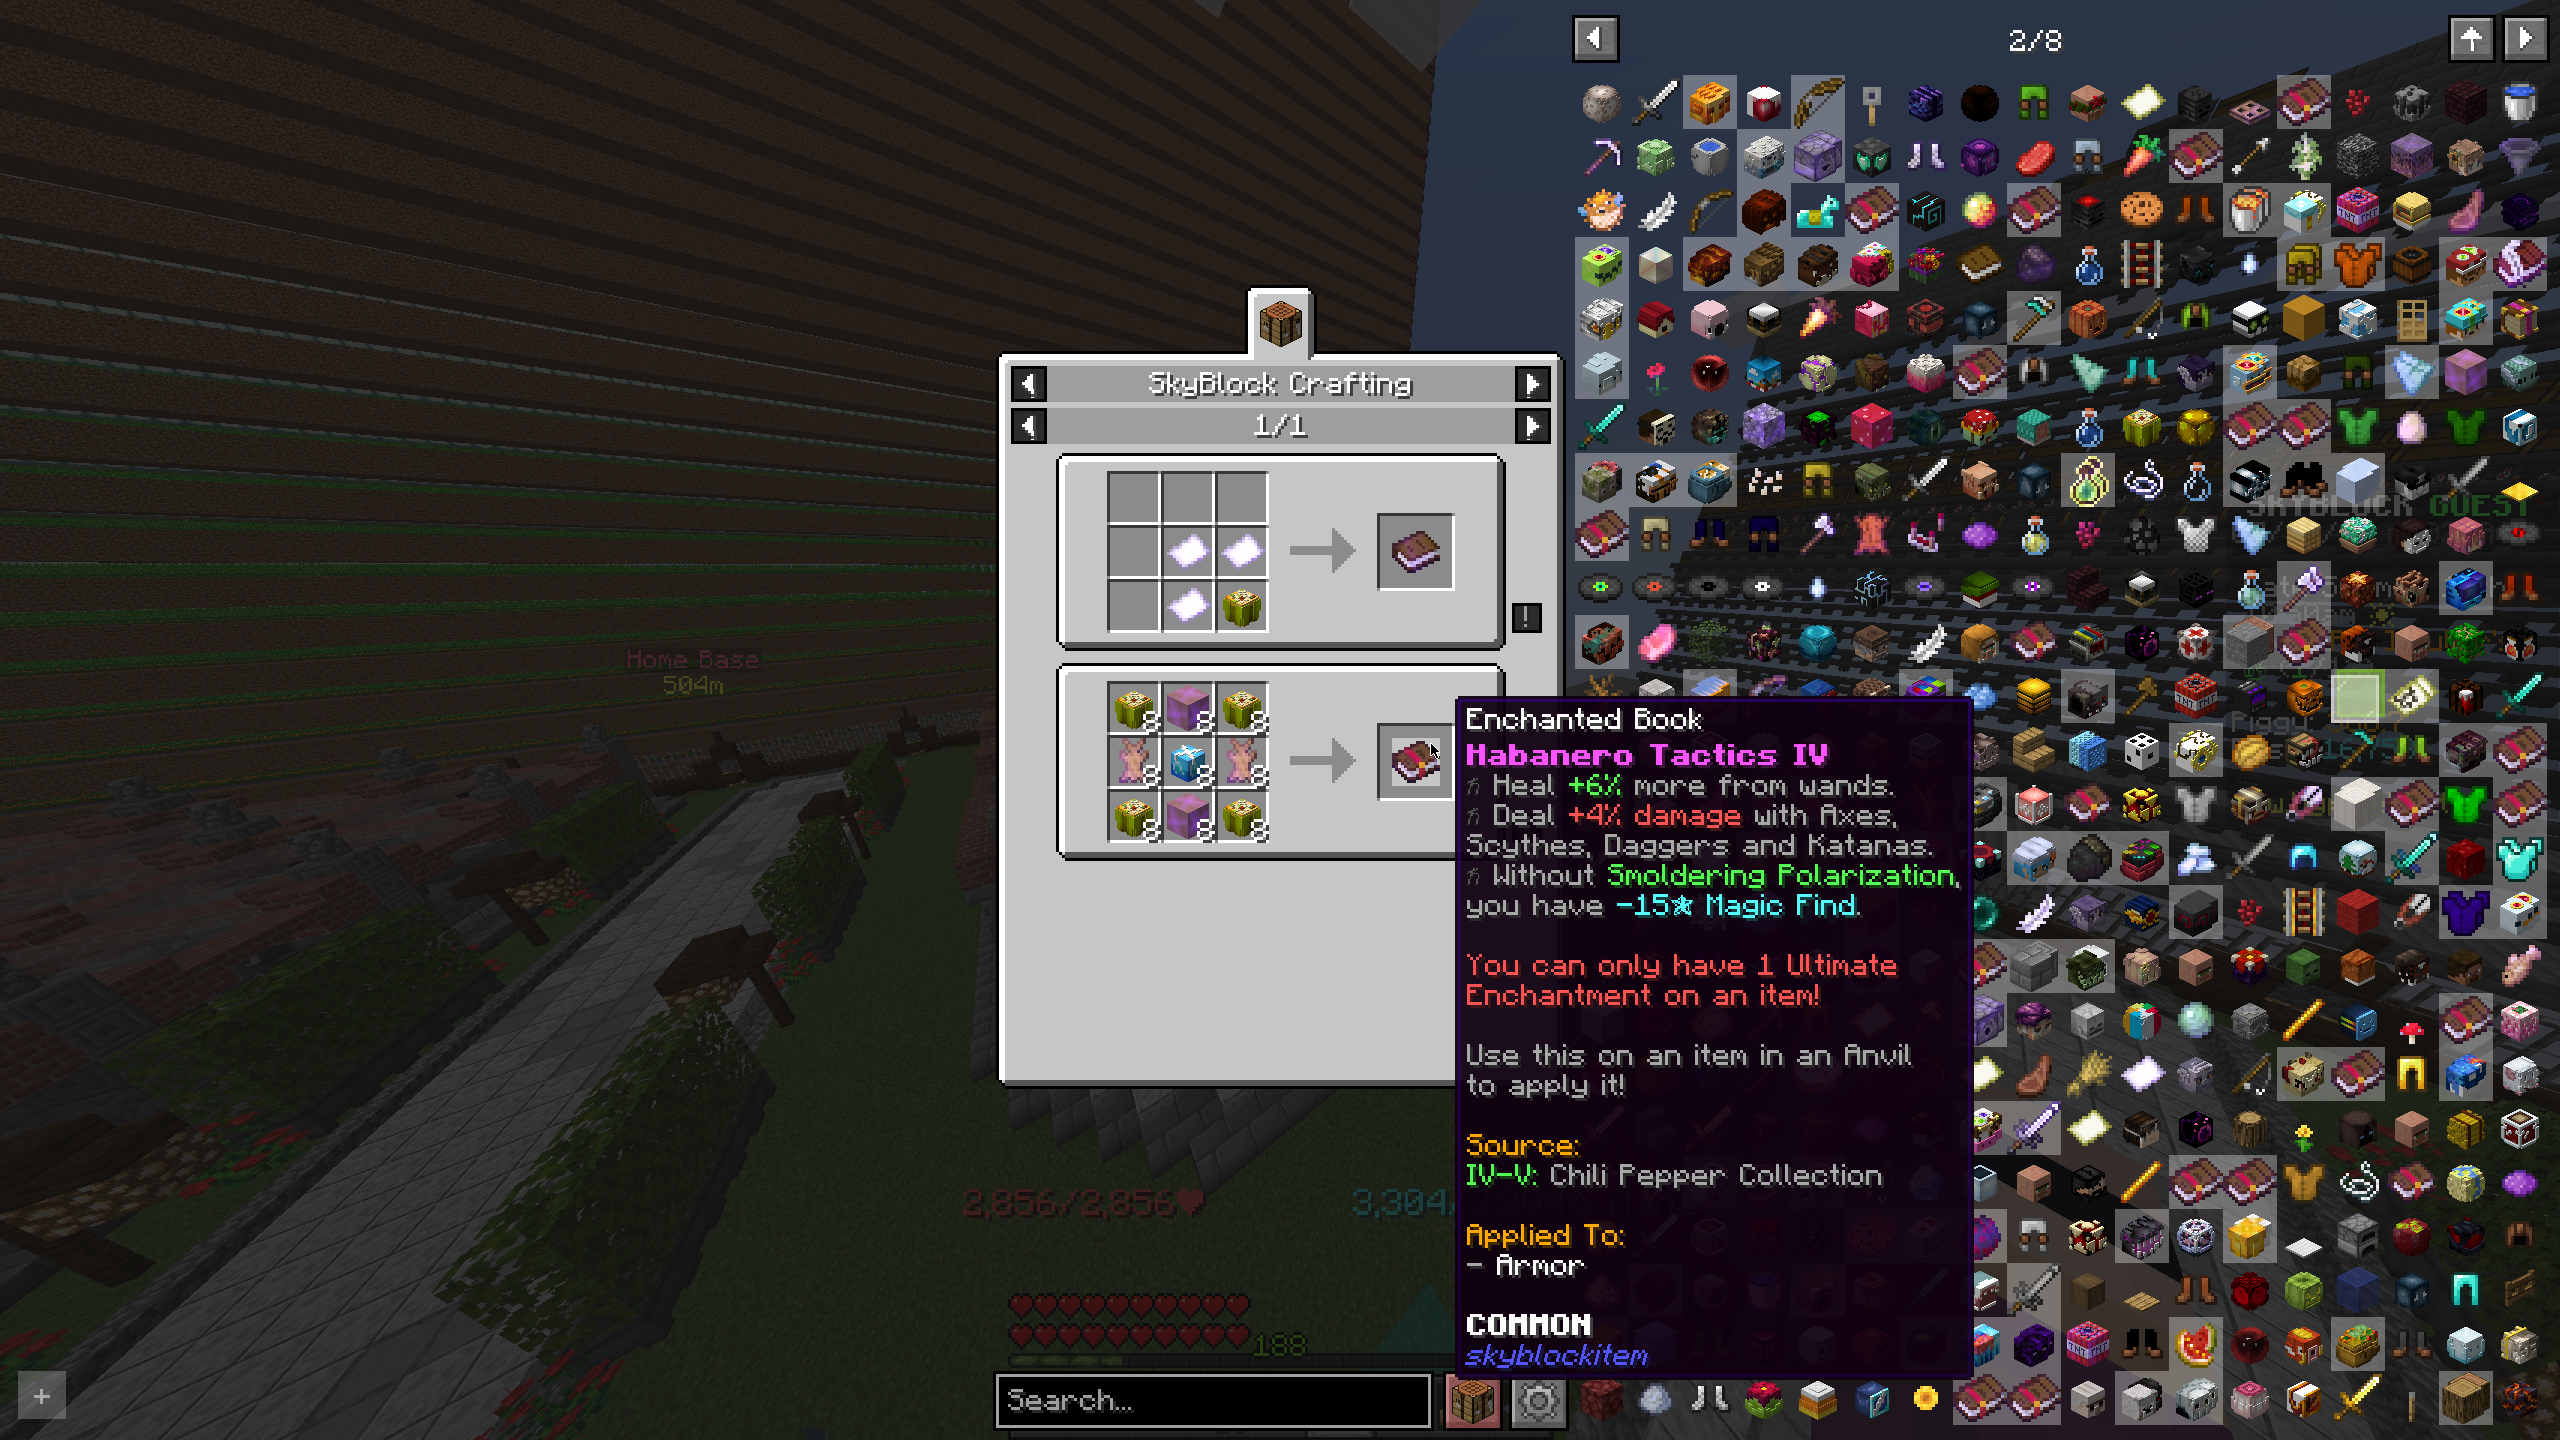 Here you can see the crafting recipe viewer with its item list.